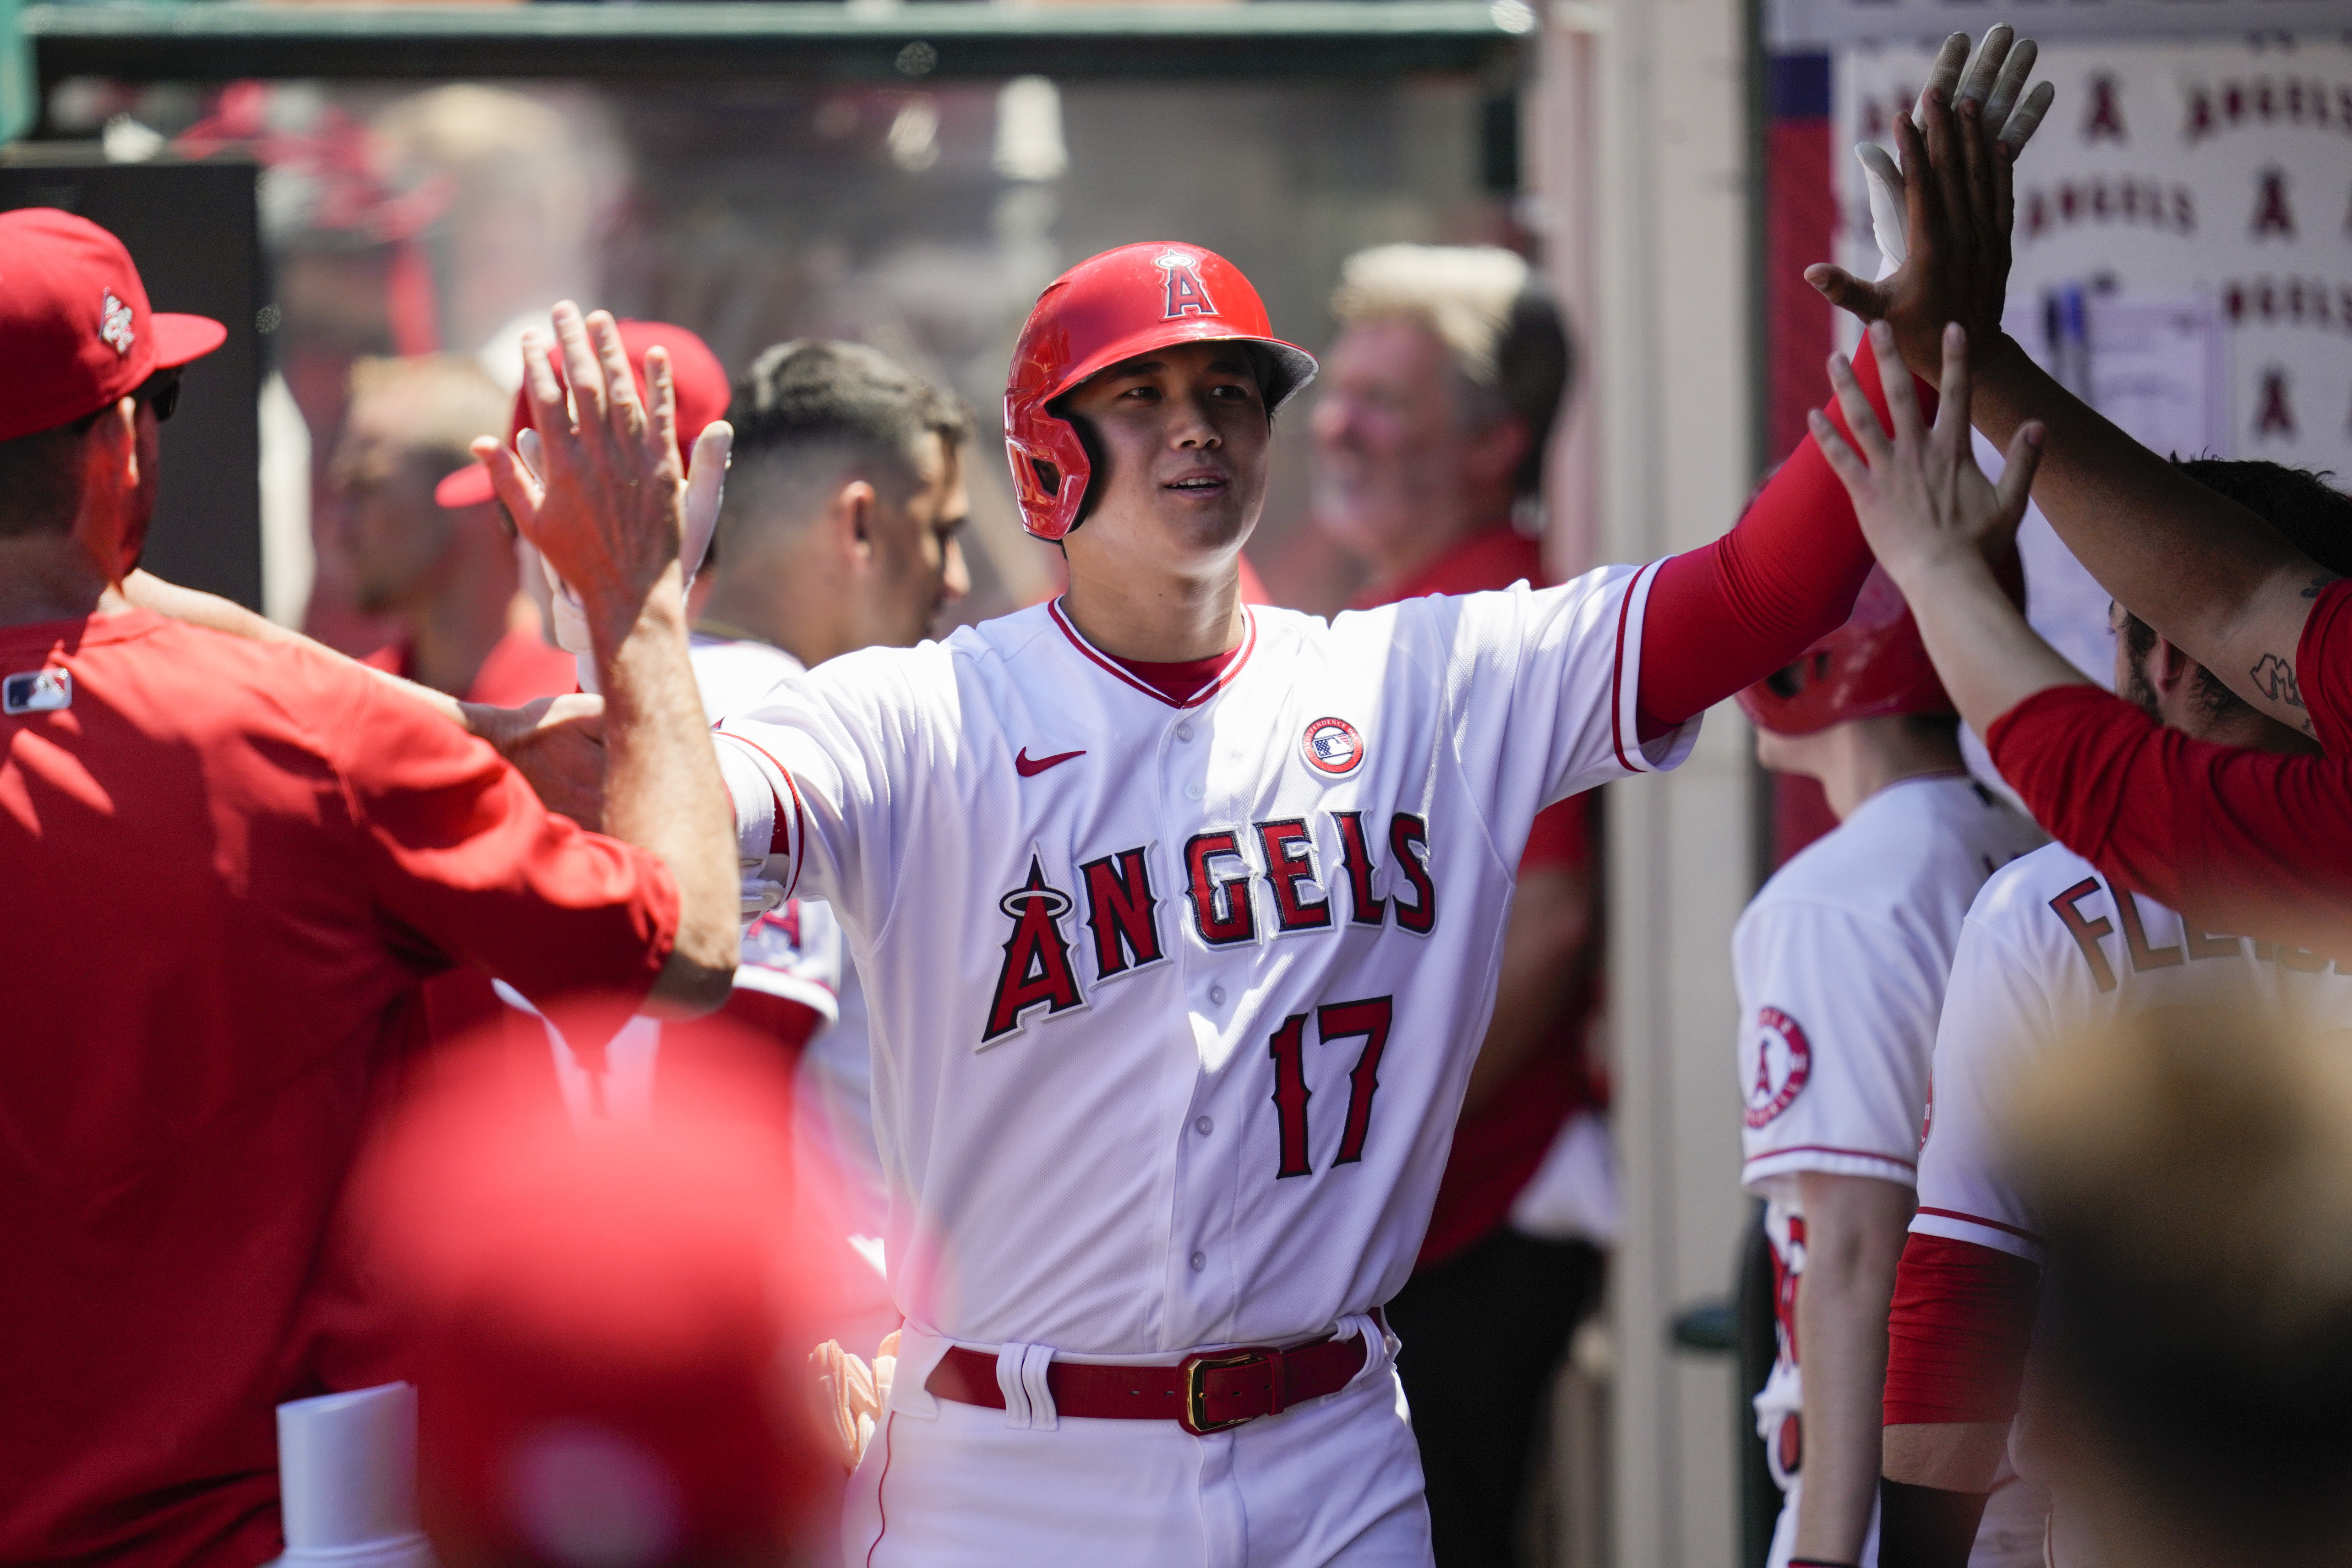 Angels News: All Star Juan Soto Calls Out Shohei Ohtani Ahead of